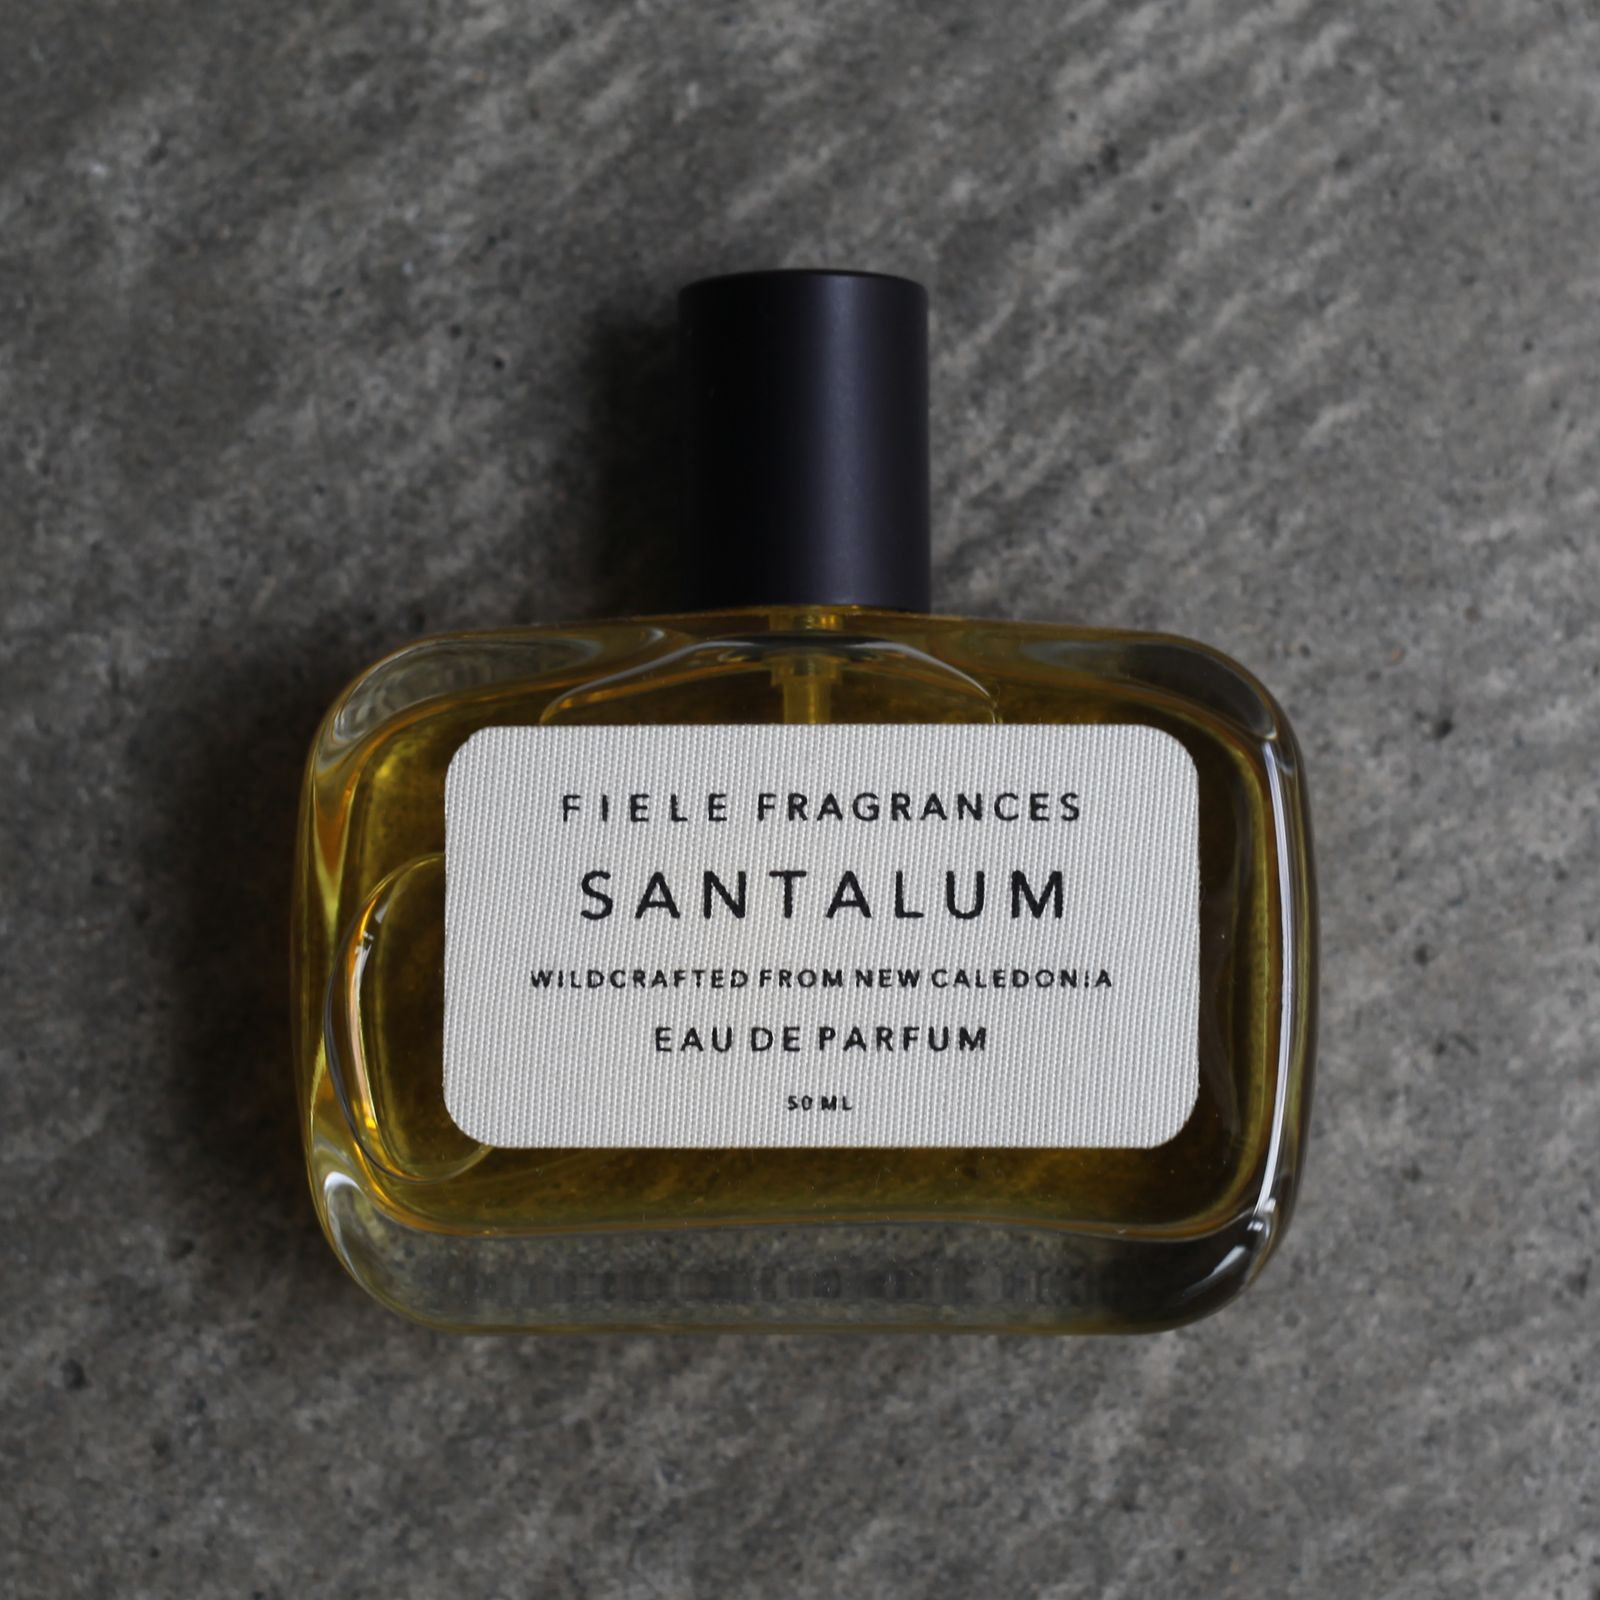 FIELE FRAGRANCES - フィエールフレグランス 香水 | 公式通販サイト 